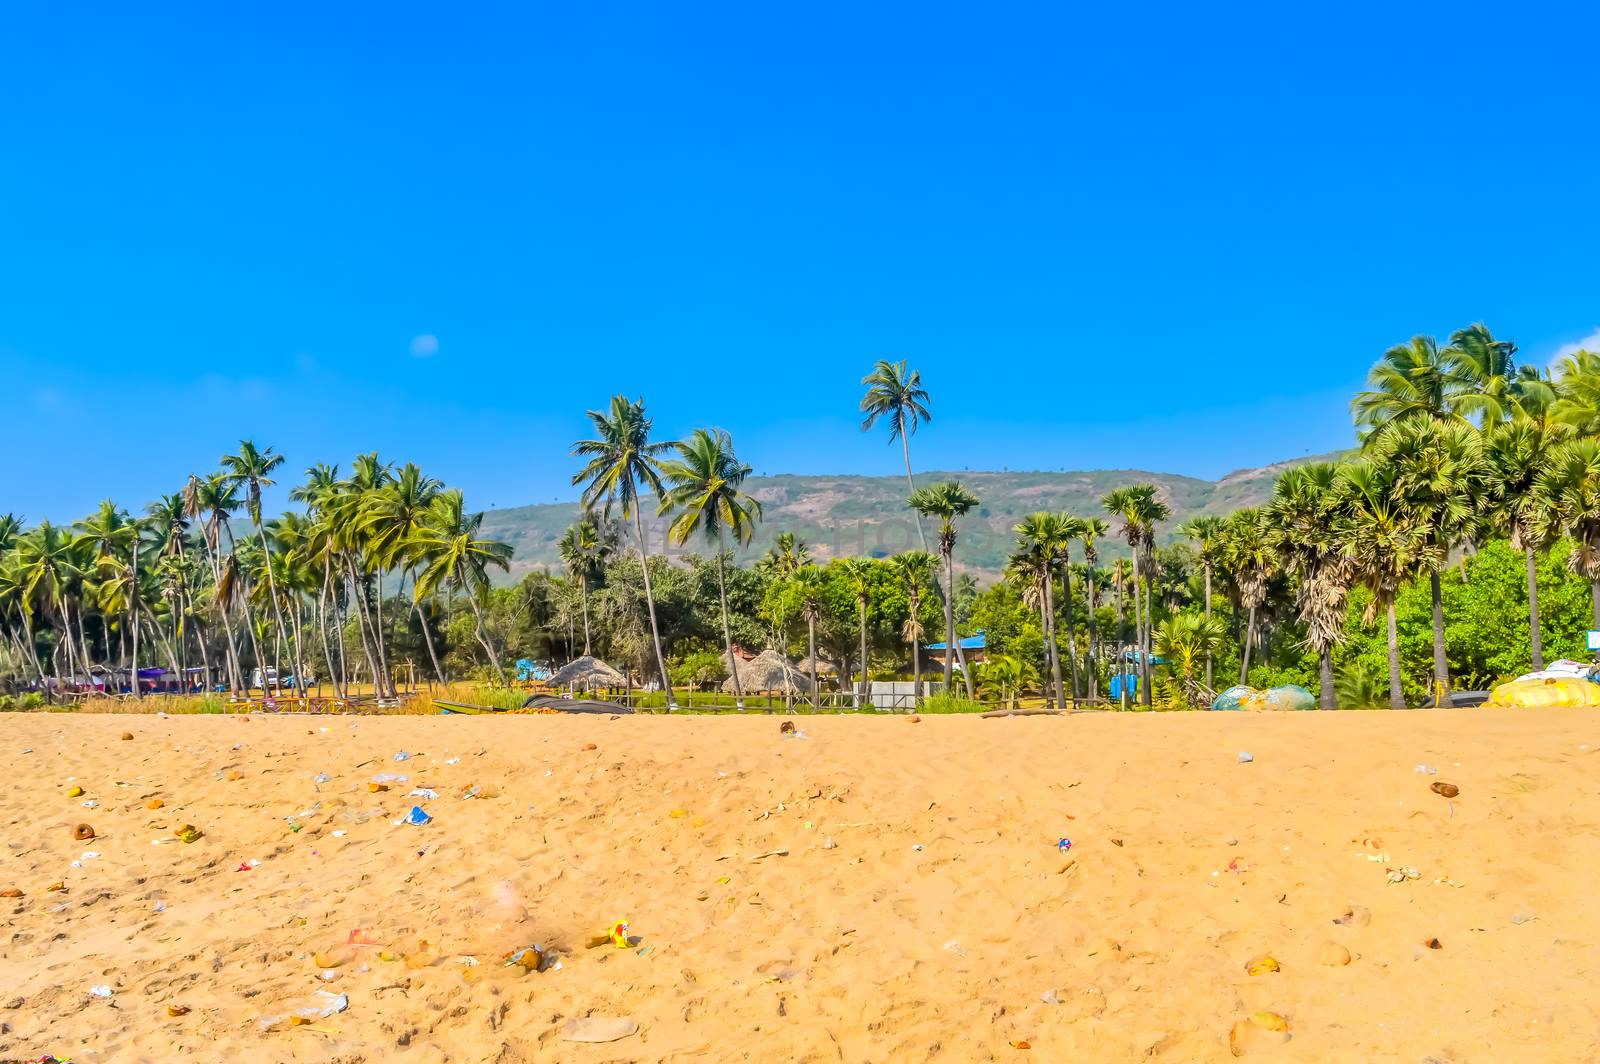 Wild Empty Tropical beach, blue sky, yellow sand, sunlight reflections taken in landscape style may be used as a background, wallpaper, screen saver banner Travel vacation concept. The image is exciting, bright, sensational, tranquil, calm, stunning.